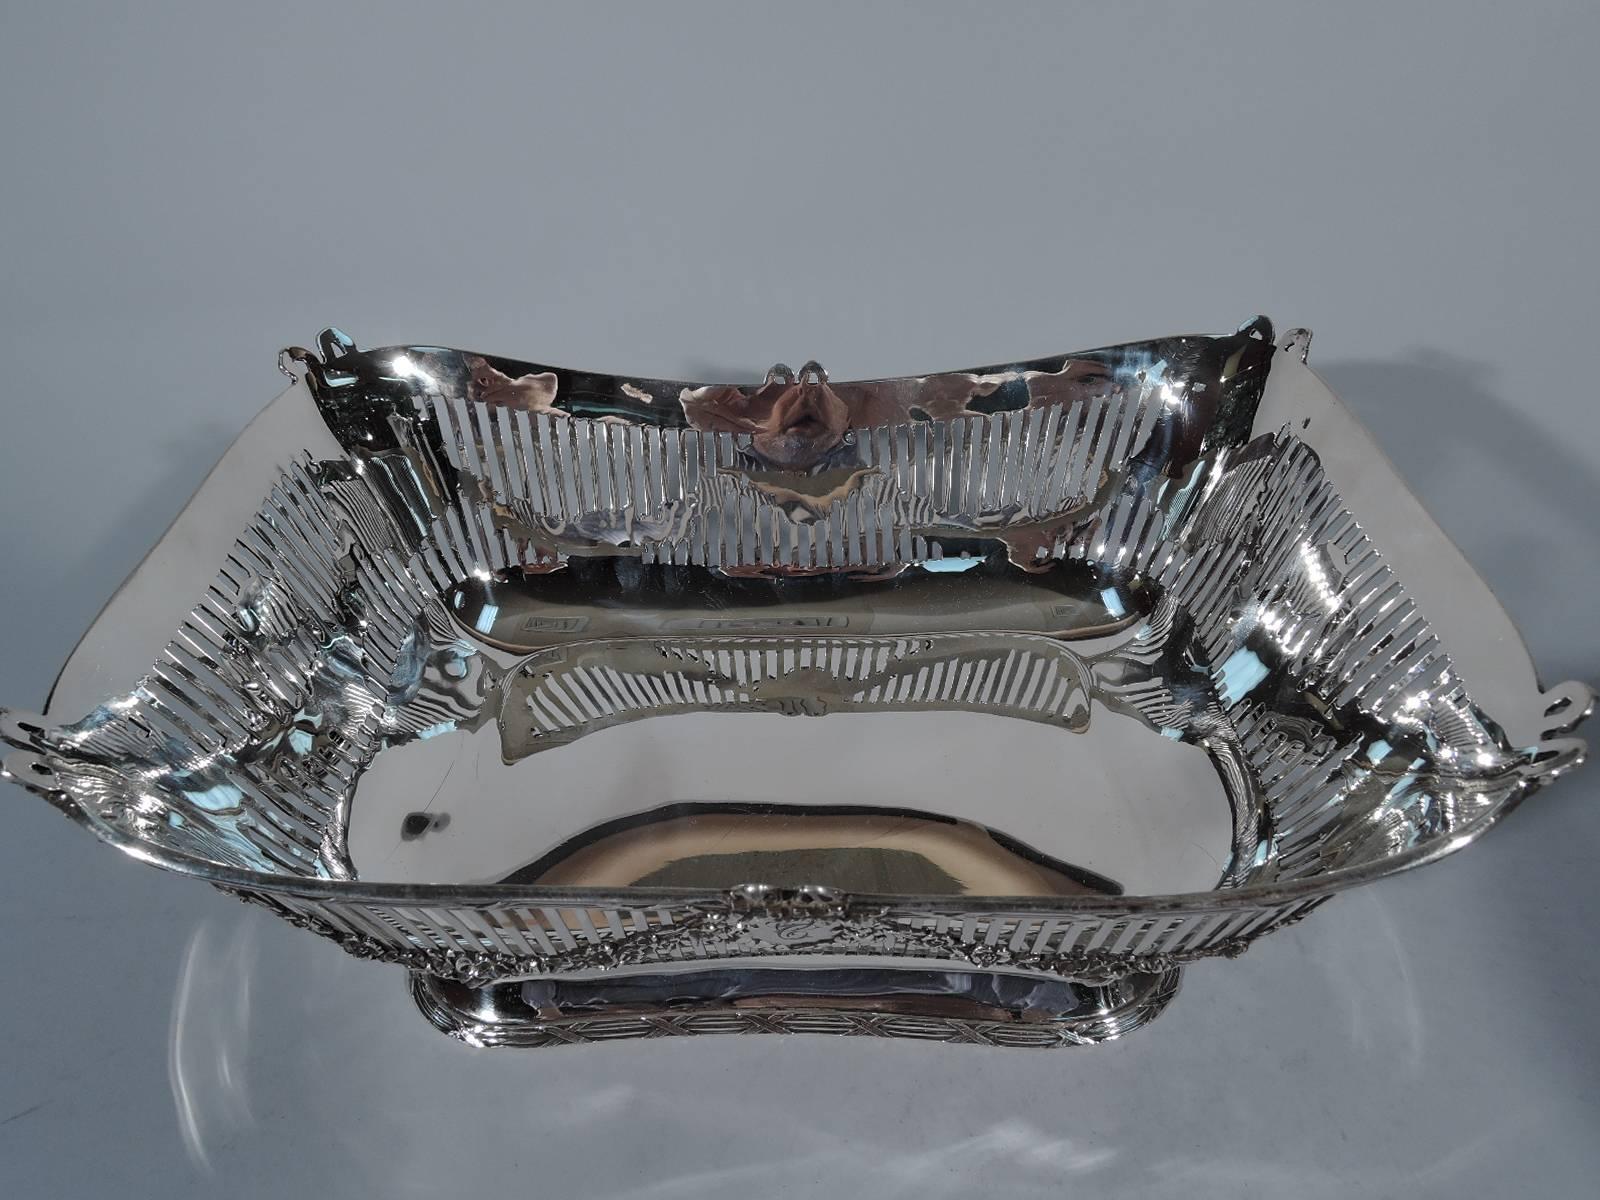 Edwardian neoclassical sterling silver bread basket. Made by Graff, Washbourne & Dunn in New York, circa 1910, for JE Caldwell in Philadelphia. Rectilinear with rounded corners and asymmetrical rim. Sides have linear piercing with applied garlands